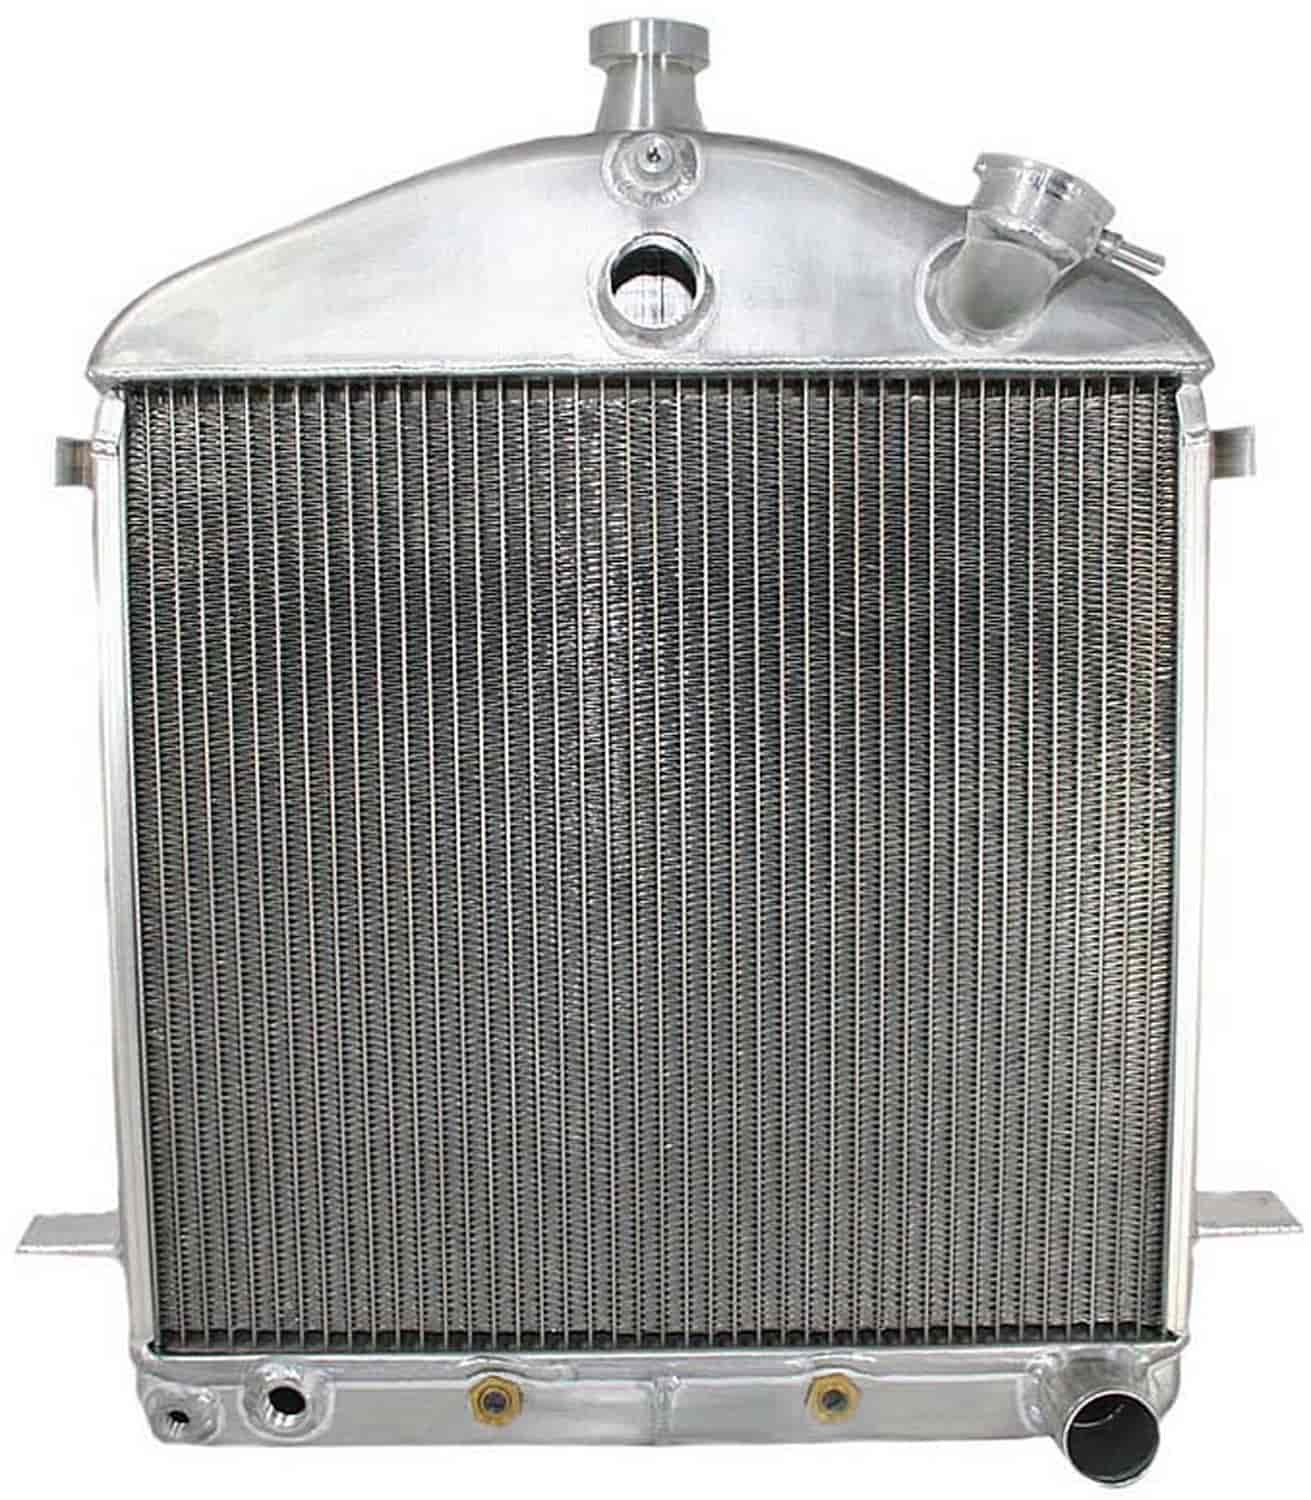 ExactFit Radiator for 1927 Model T with Early GM Engine